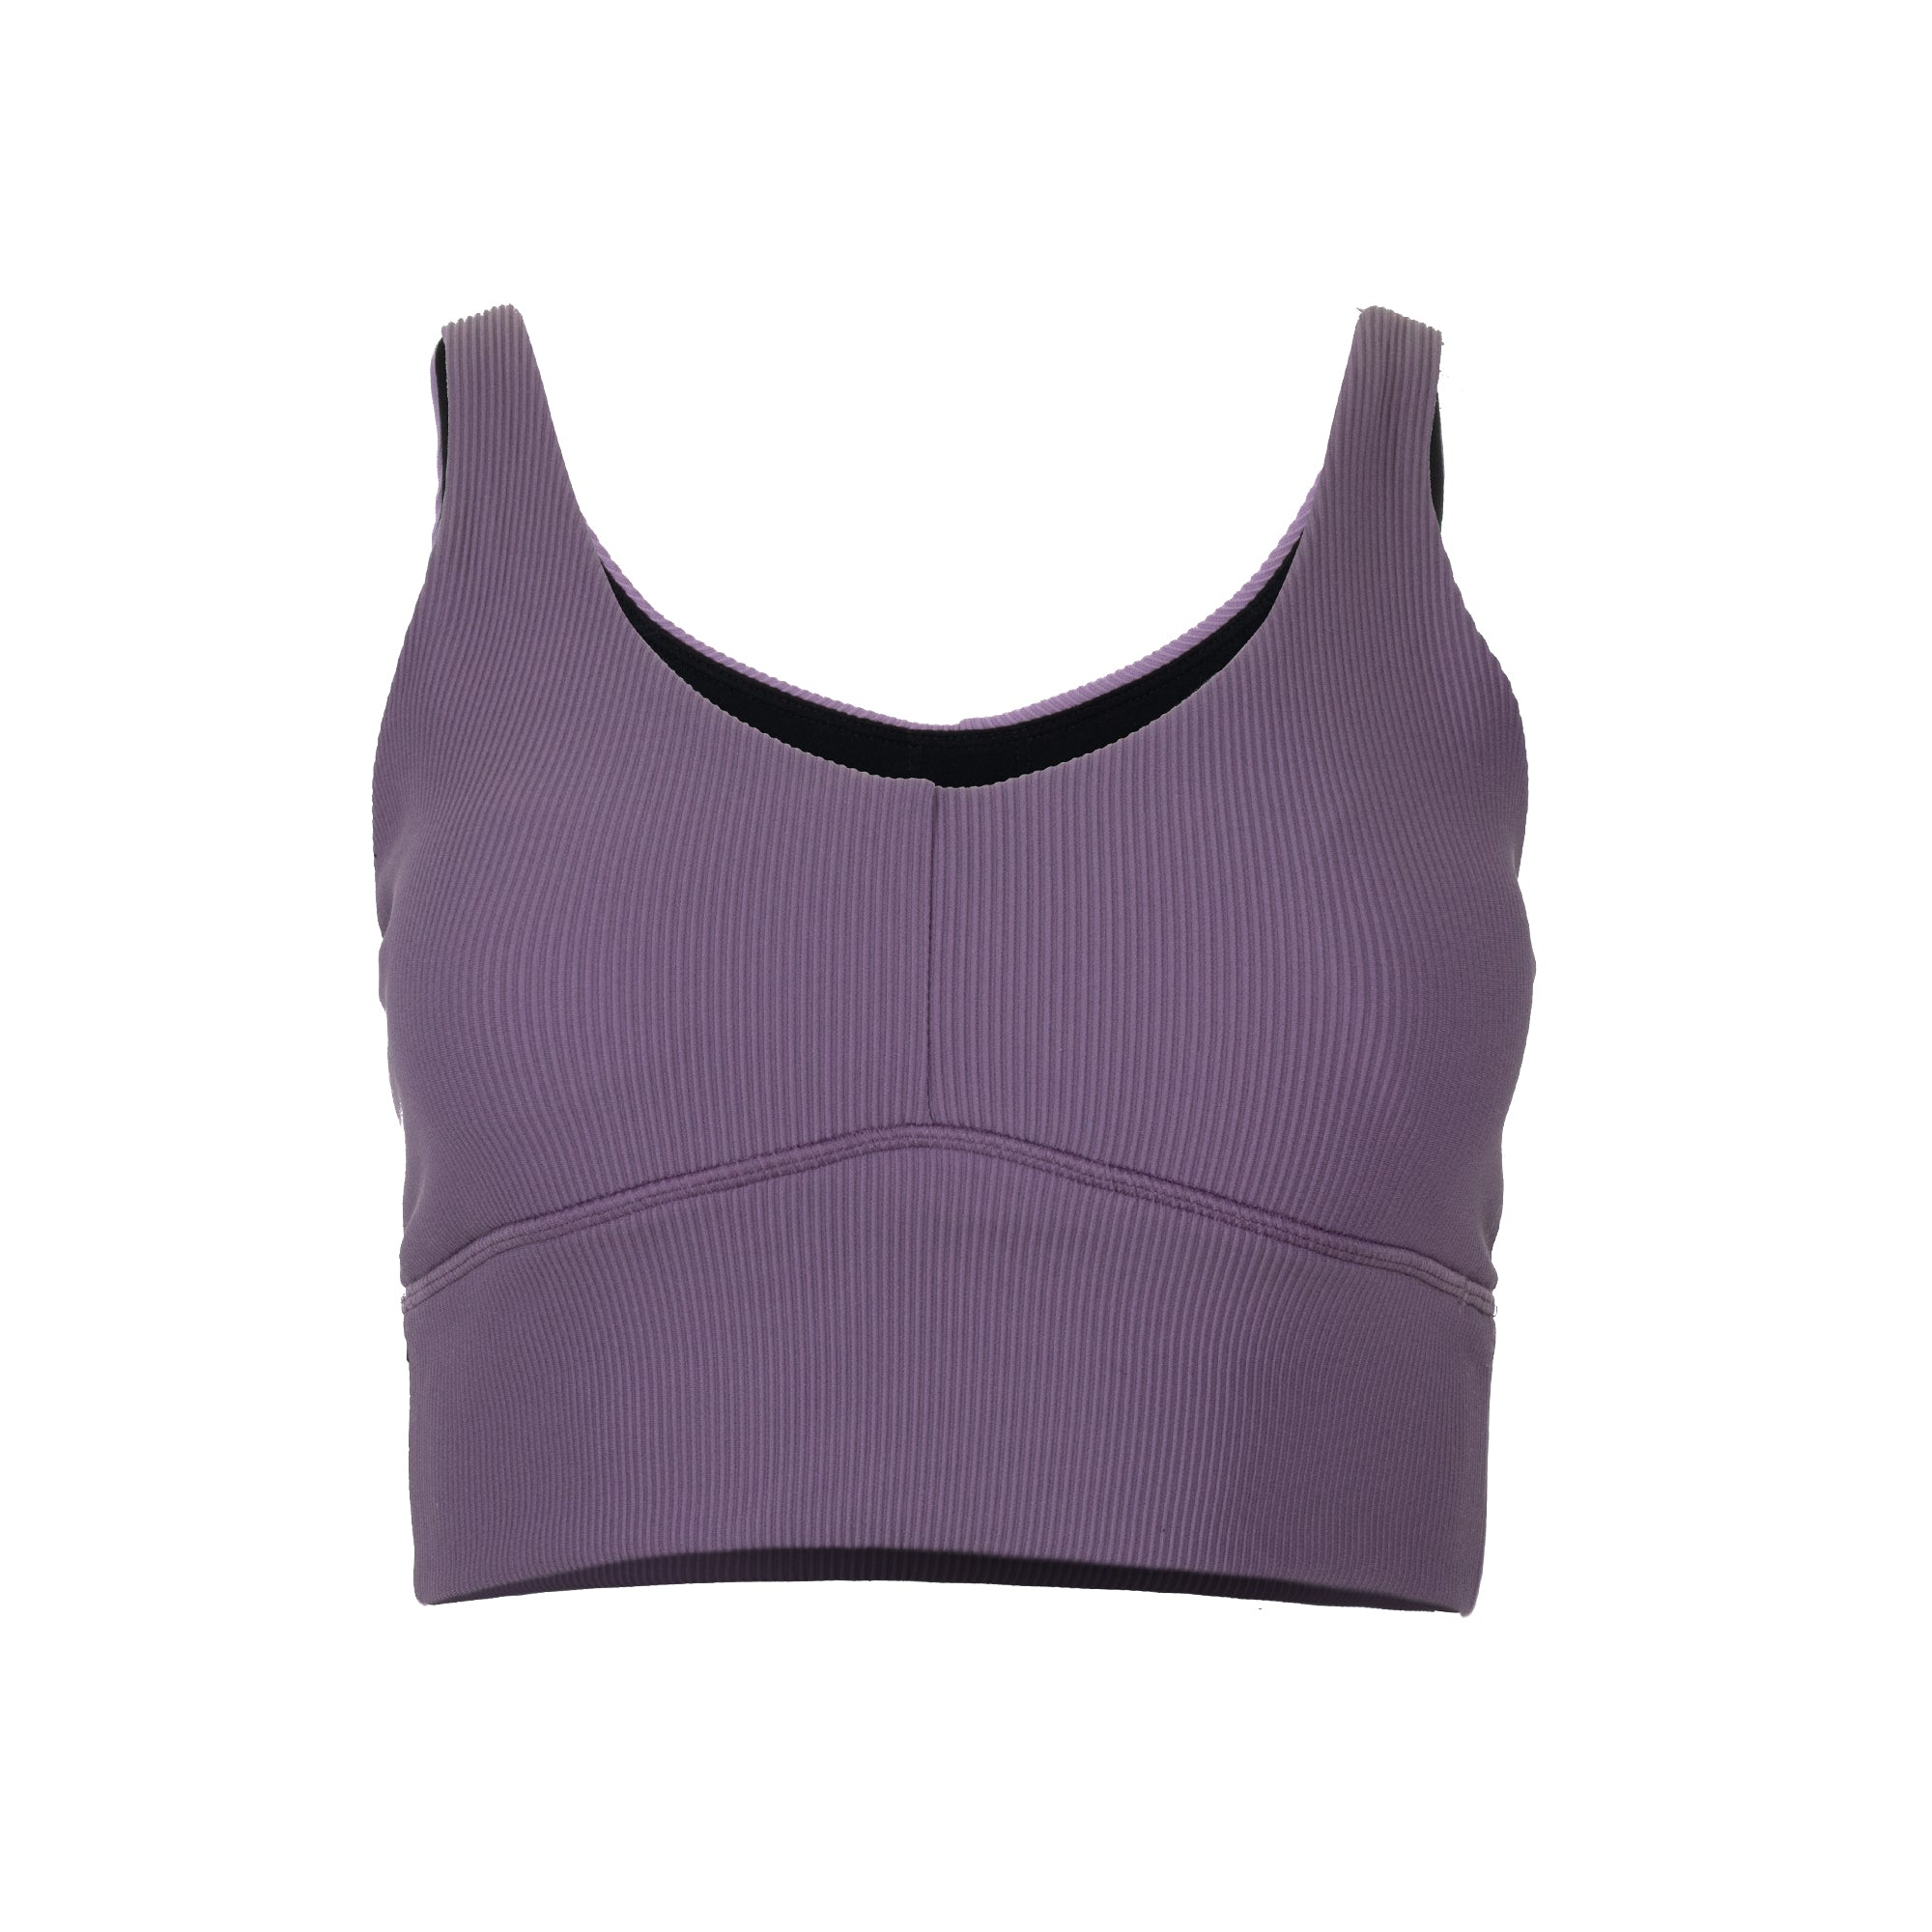 Orchid Ribbed Intention bra tank